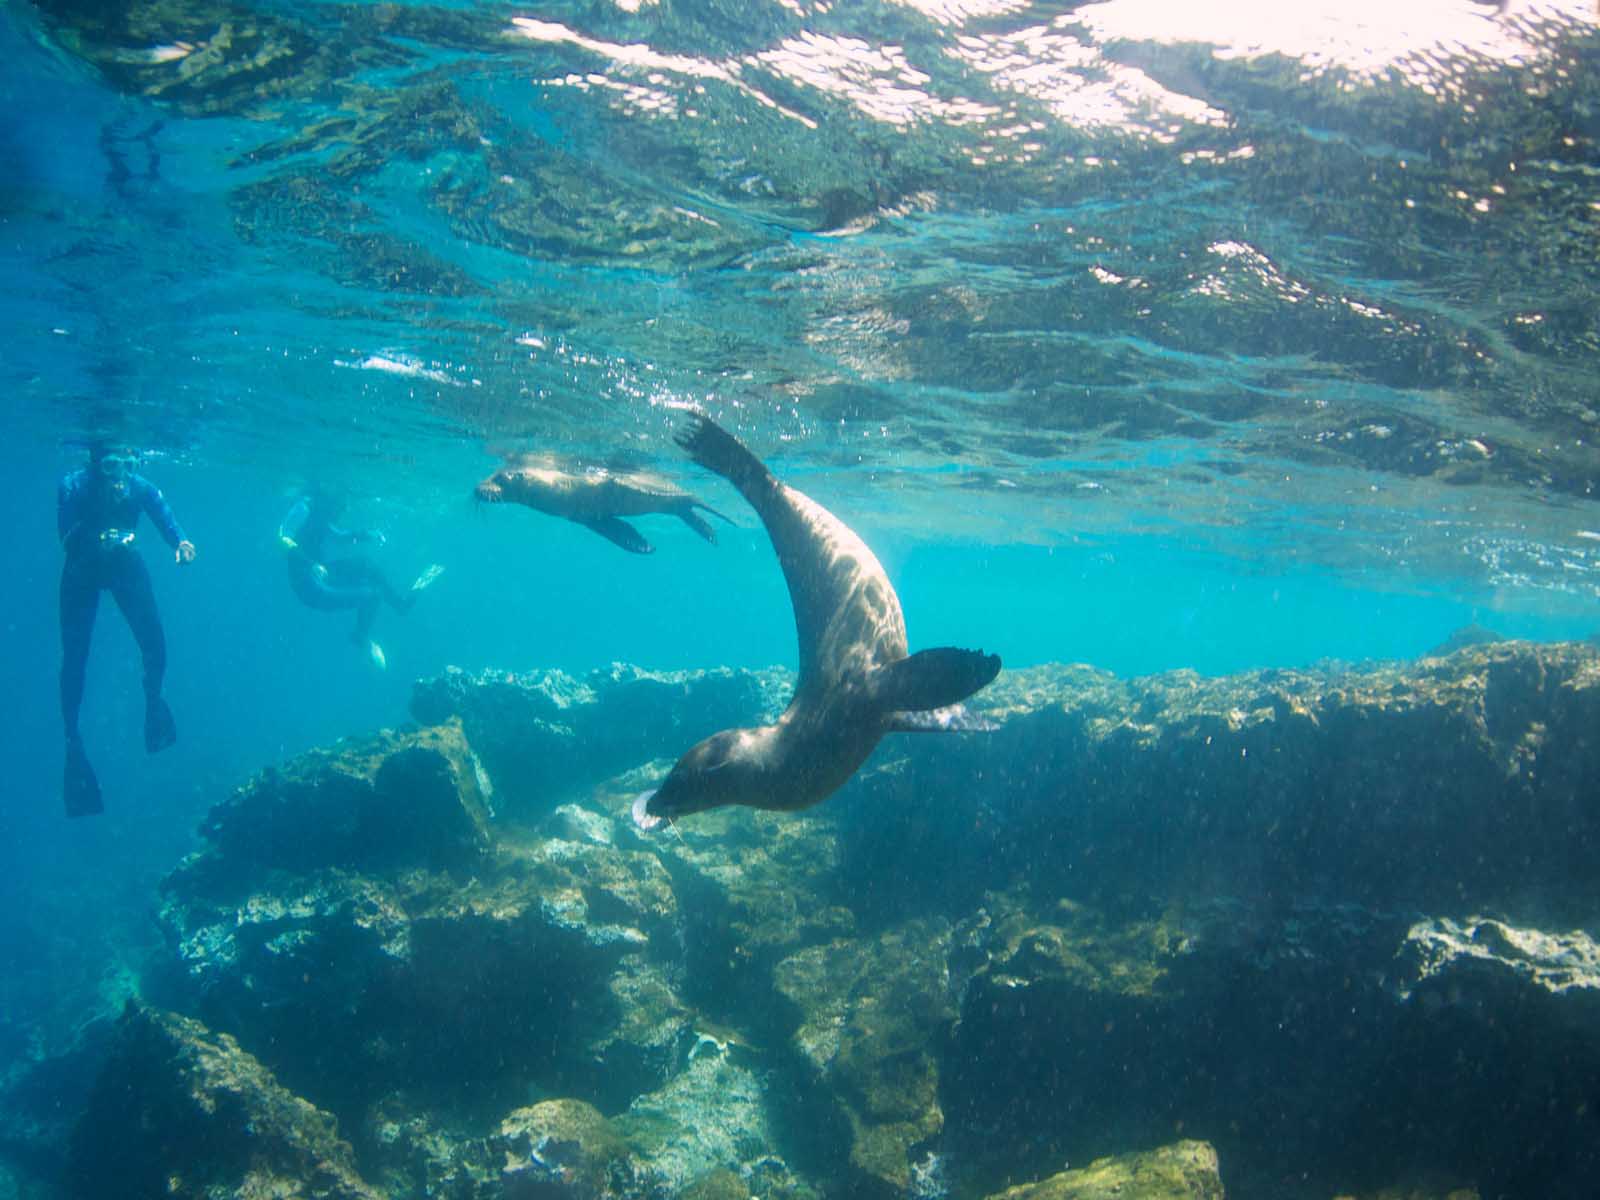 Snorkeling vs. Diving in the Galapagos Islands